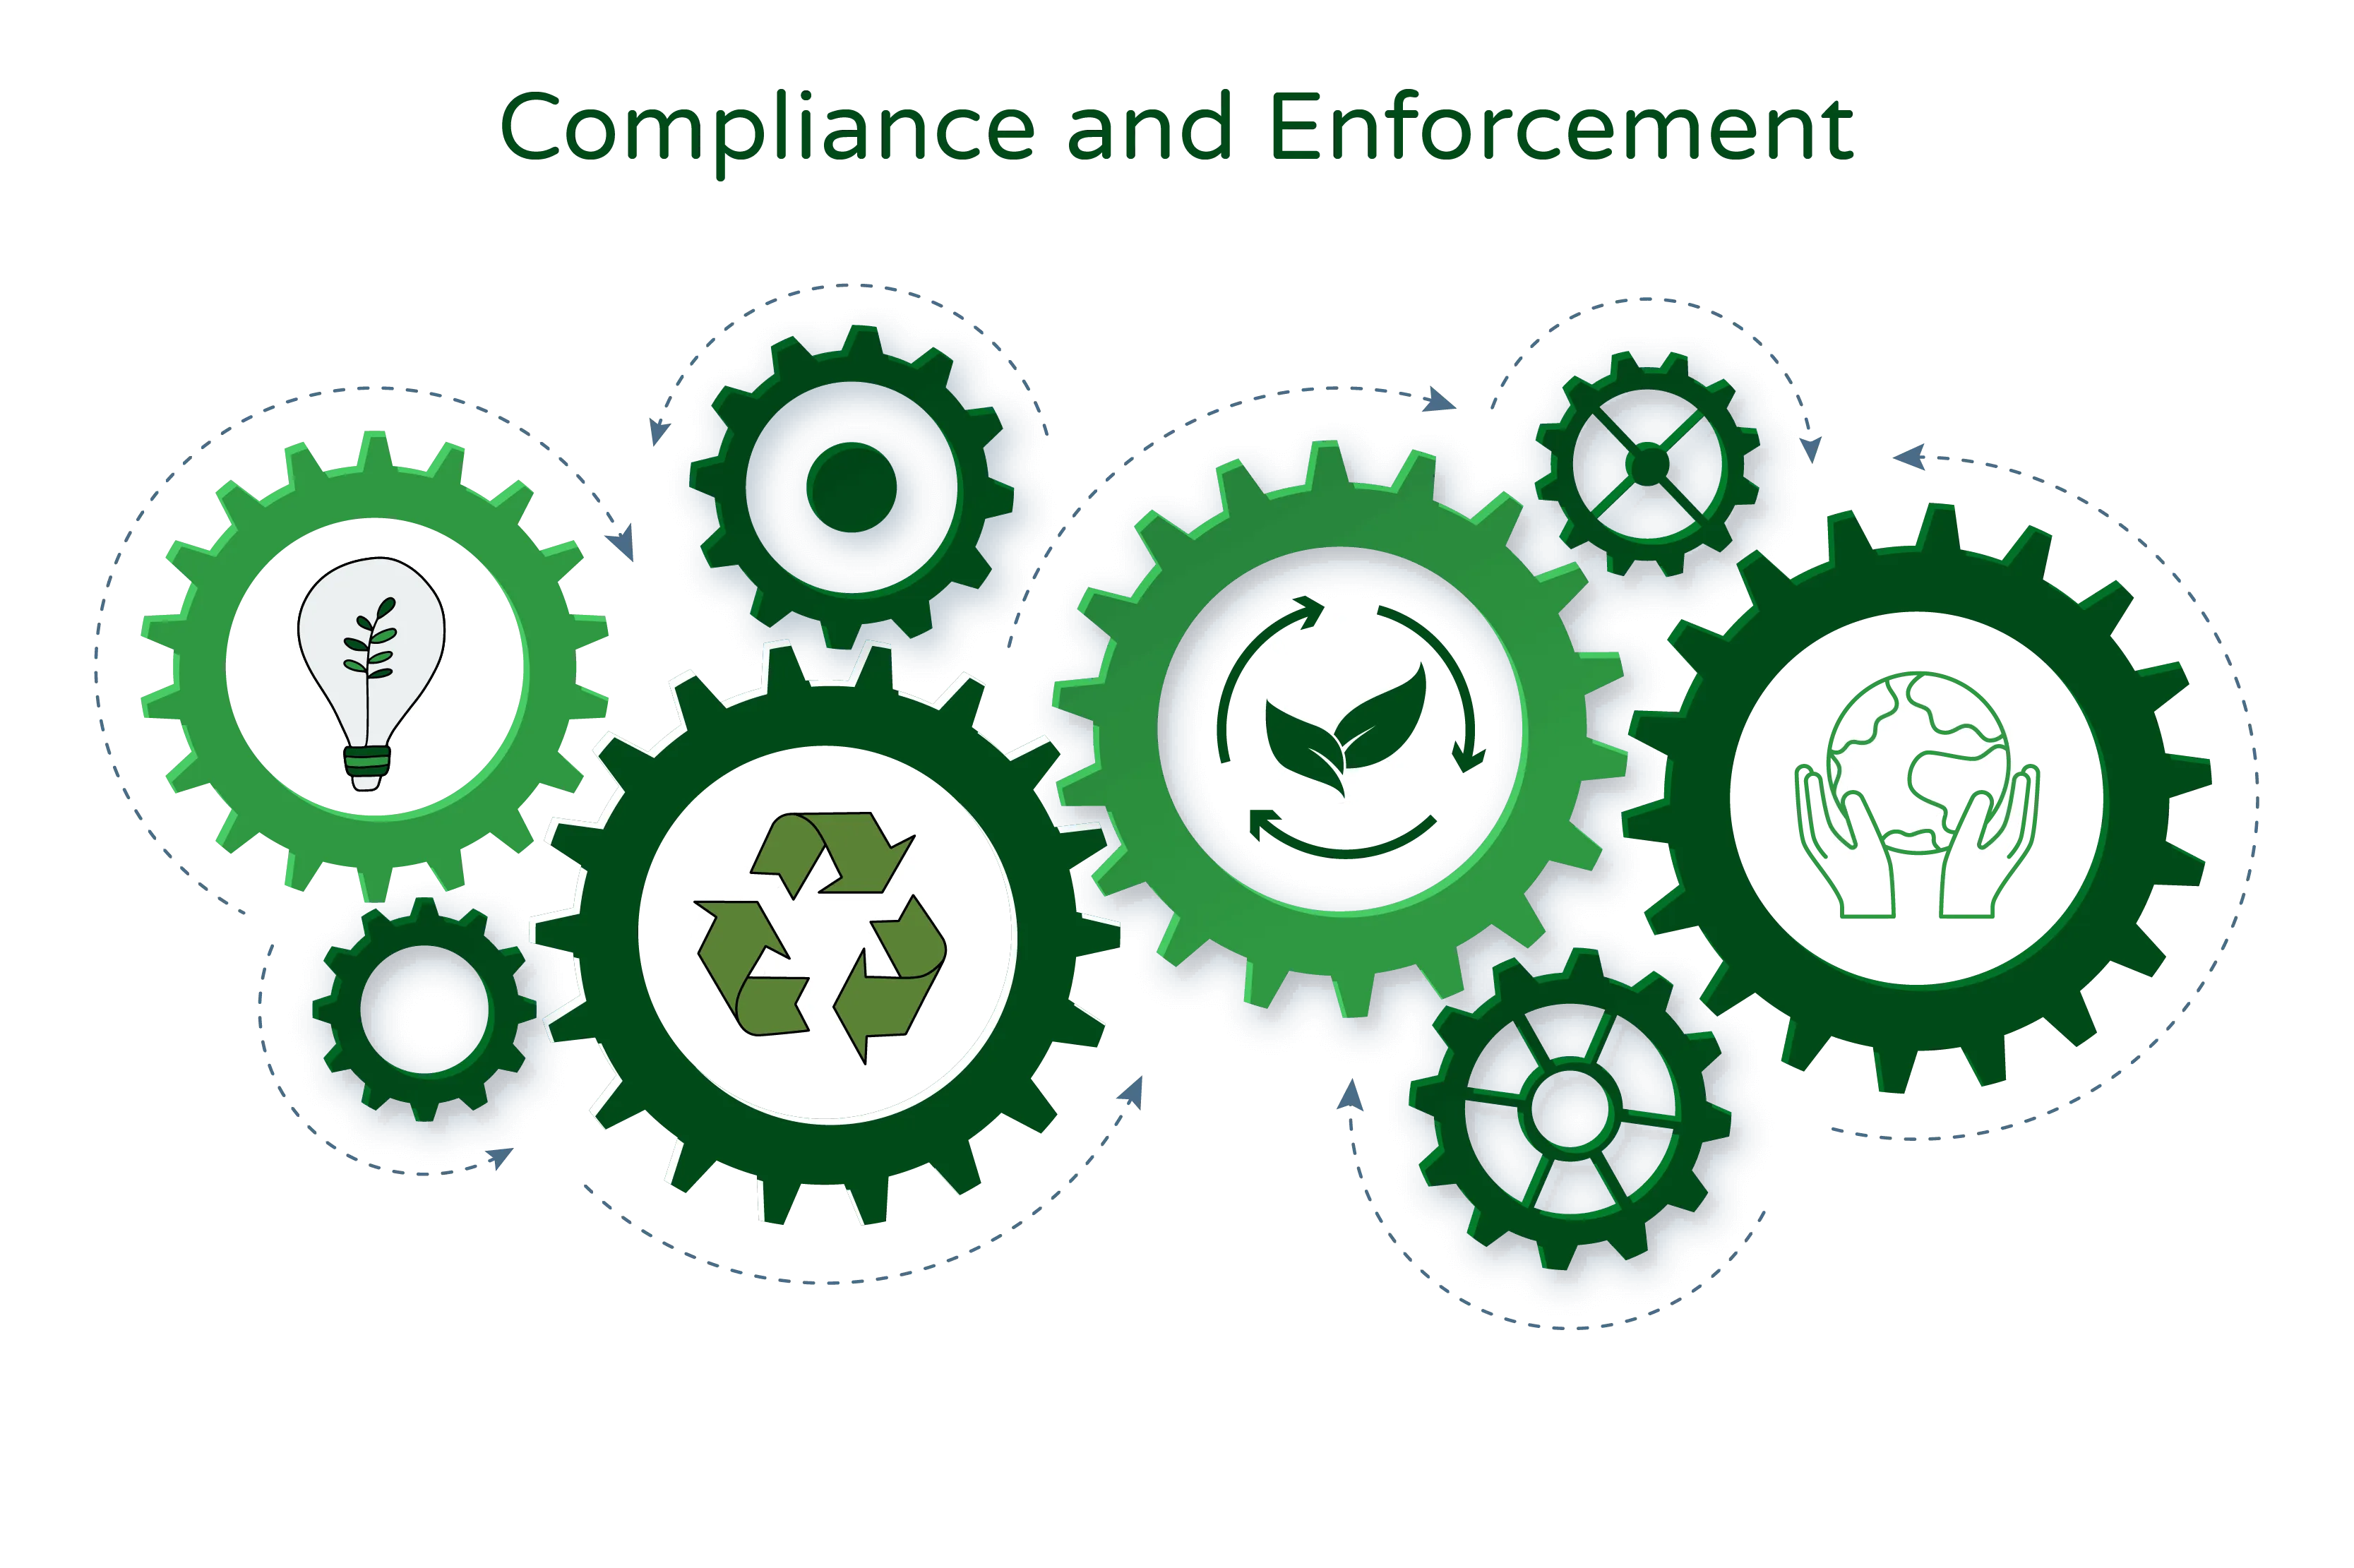 Illustration titled 'Compliance and Enforcement.' The image features four settings symbols, each representing different aspects of compliance and enforcement.  In the first setting symbol, there is a bulb of sustainability, signifying the importance of sustainable practices and compliance with environmental regulations.  In the second setting symbol, there are leaves, representing nature and ecological compliance, emphasizing the need to protect and preserve the environment.  In the third setting symbol, there are additional leaves, further emphasizing the importance of ecological compliance and sustainable actions.  In the fourth setting symbol, there are sustainability symbols, indicating the focus on promoting and enforcing sustainable practices in various sectors.  The illustration visually represents the key themes of compliance and enforcement related to sustainability, environmental regulations, and the need for responsible actions to protect the environment.